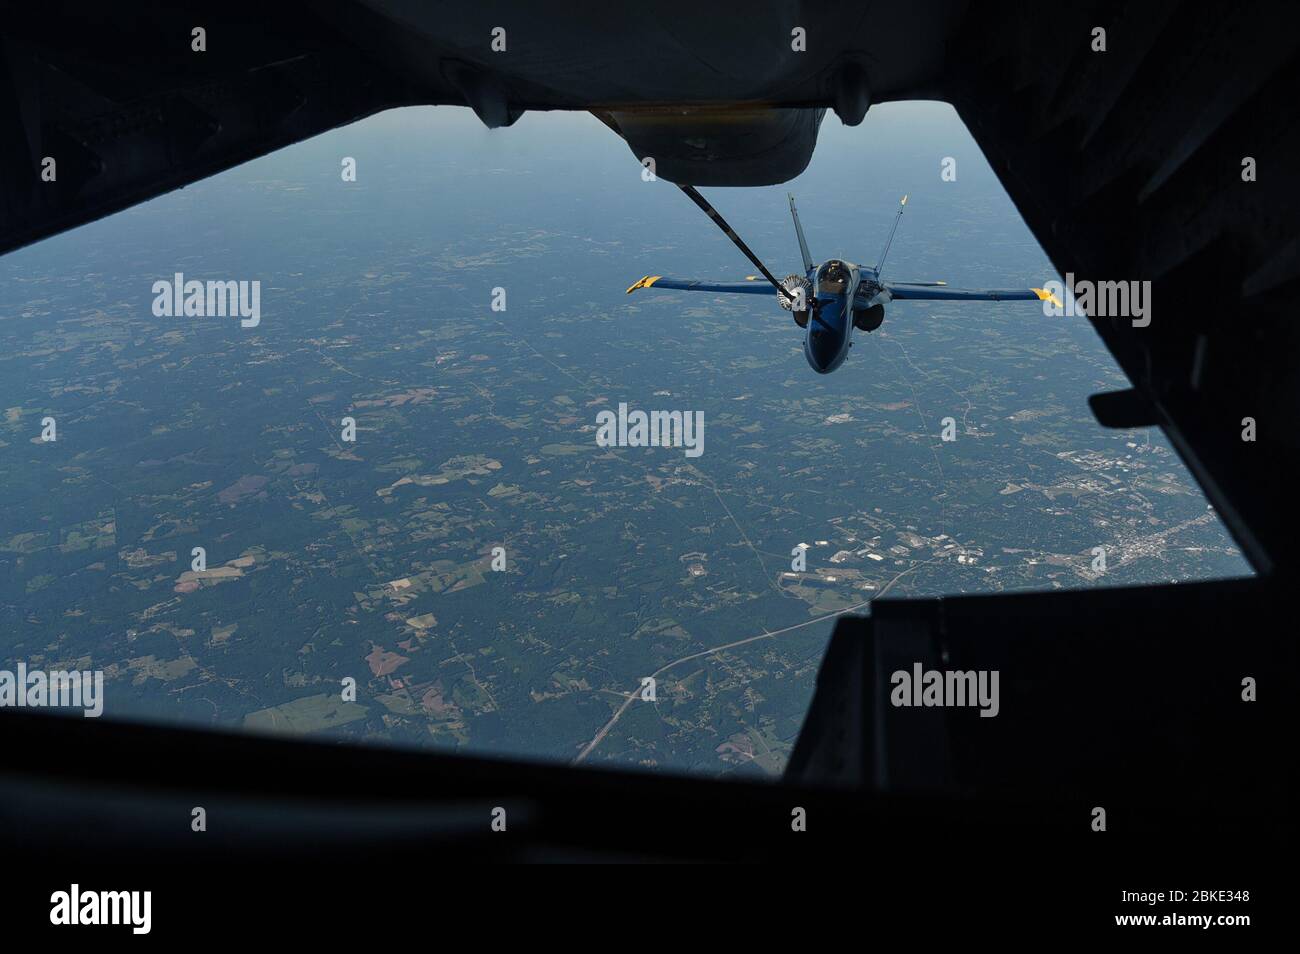 An F/A-18 Hornet assigned to the U.S. Navy Blue Angels refuels in-flight from a 305th Air Mobility Wing KC-10 Extender assigned to Joint Base McGuire-Dix-Lakehurst, N.J., during a flyover as part of the America Strong campaign over Atlanta, Washington DC, and Baltimore, May 2, 2020. The Blue Angels flew alongside the U.S. Air Force Thunderbirds for the campaign to honor healthcare workers, first responders, and other essential peronnel who are working on the front lines to combat COVID-19. (U.S. Air Force photo by Senior Airman Ariel Owings) Stock Photo